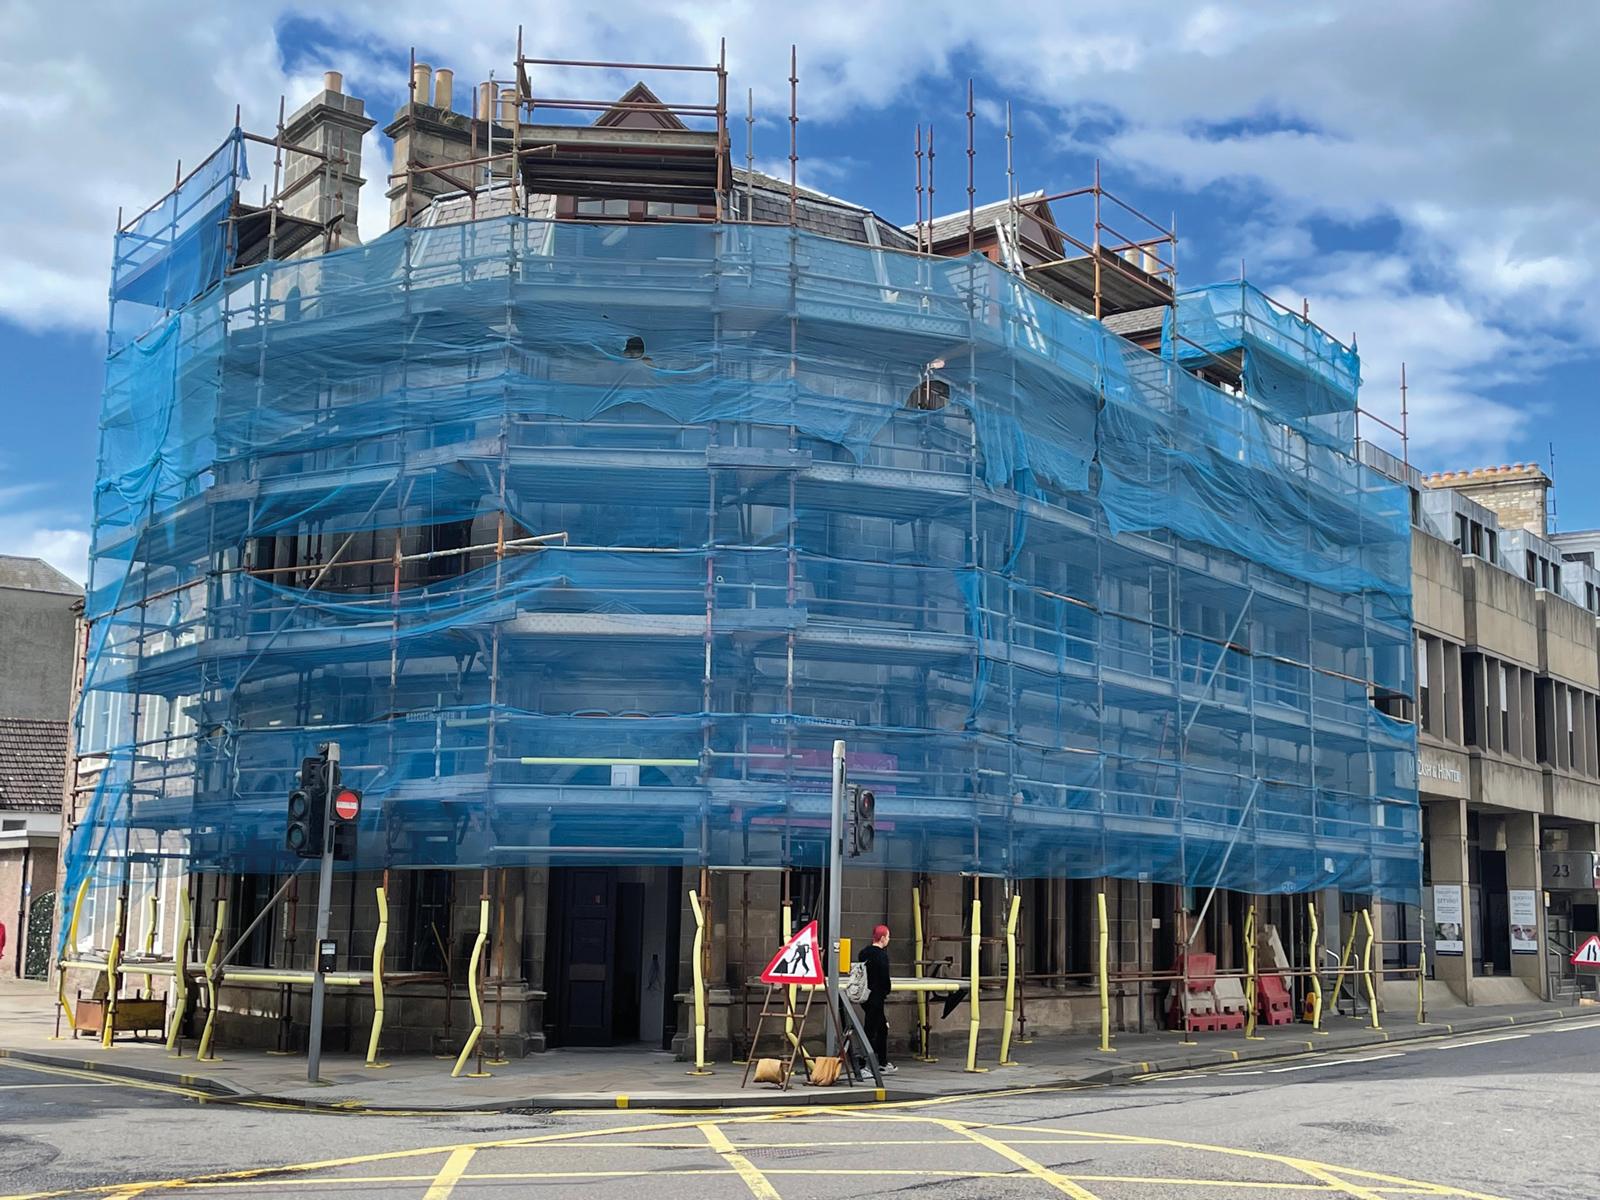 Clyde Munro's new premises in Perth, wrapped in scaffolding